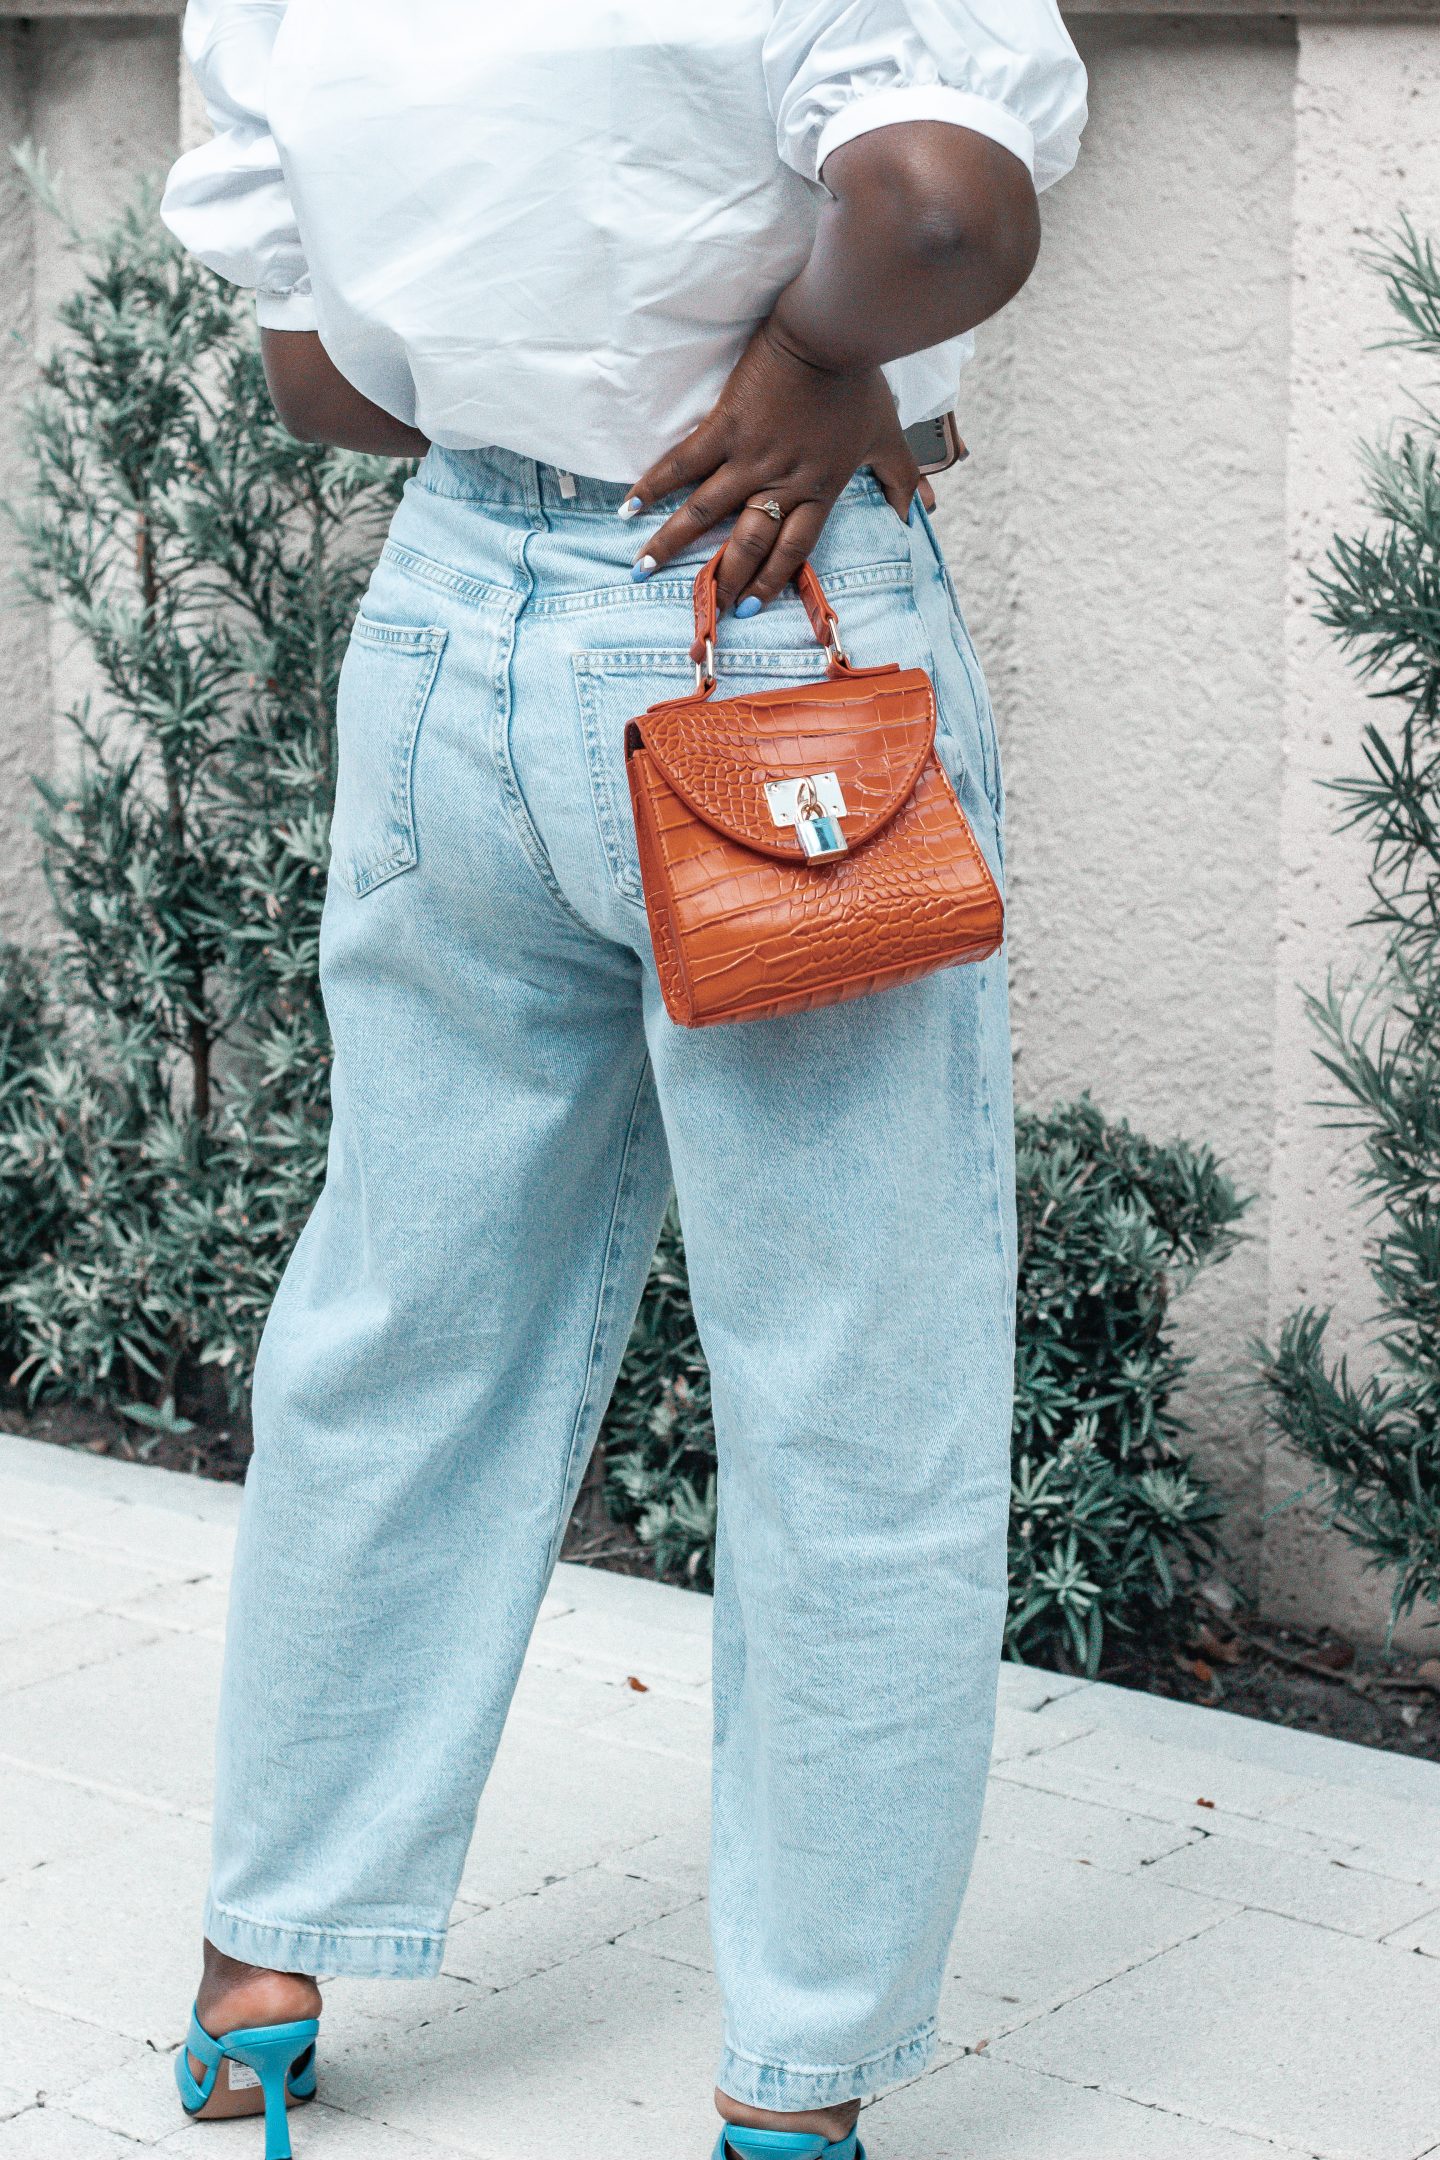 5 Places to Shop for The Best Jeans